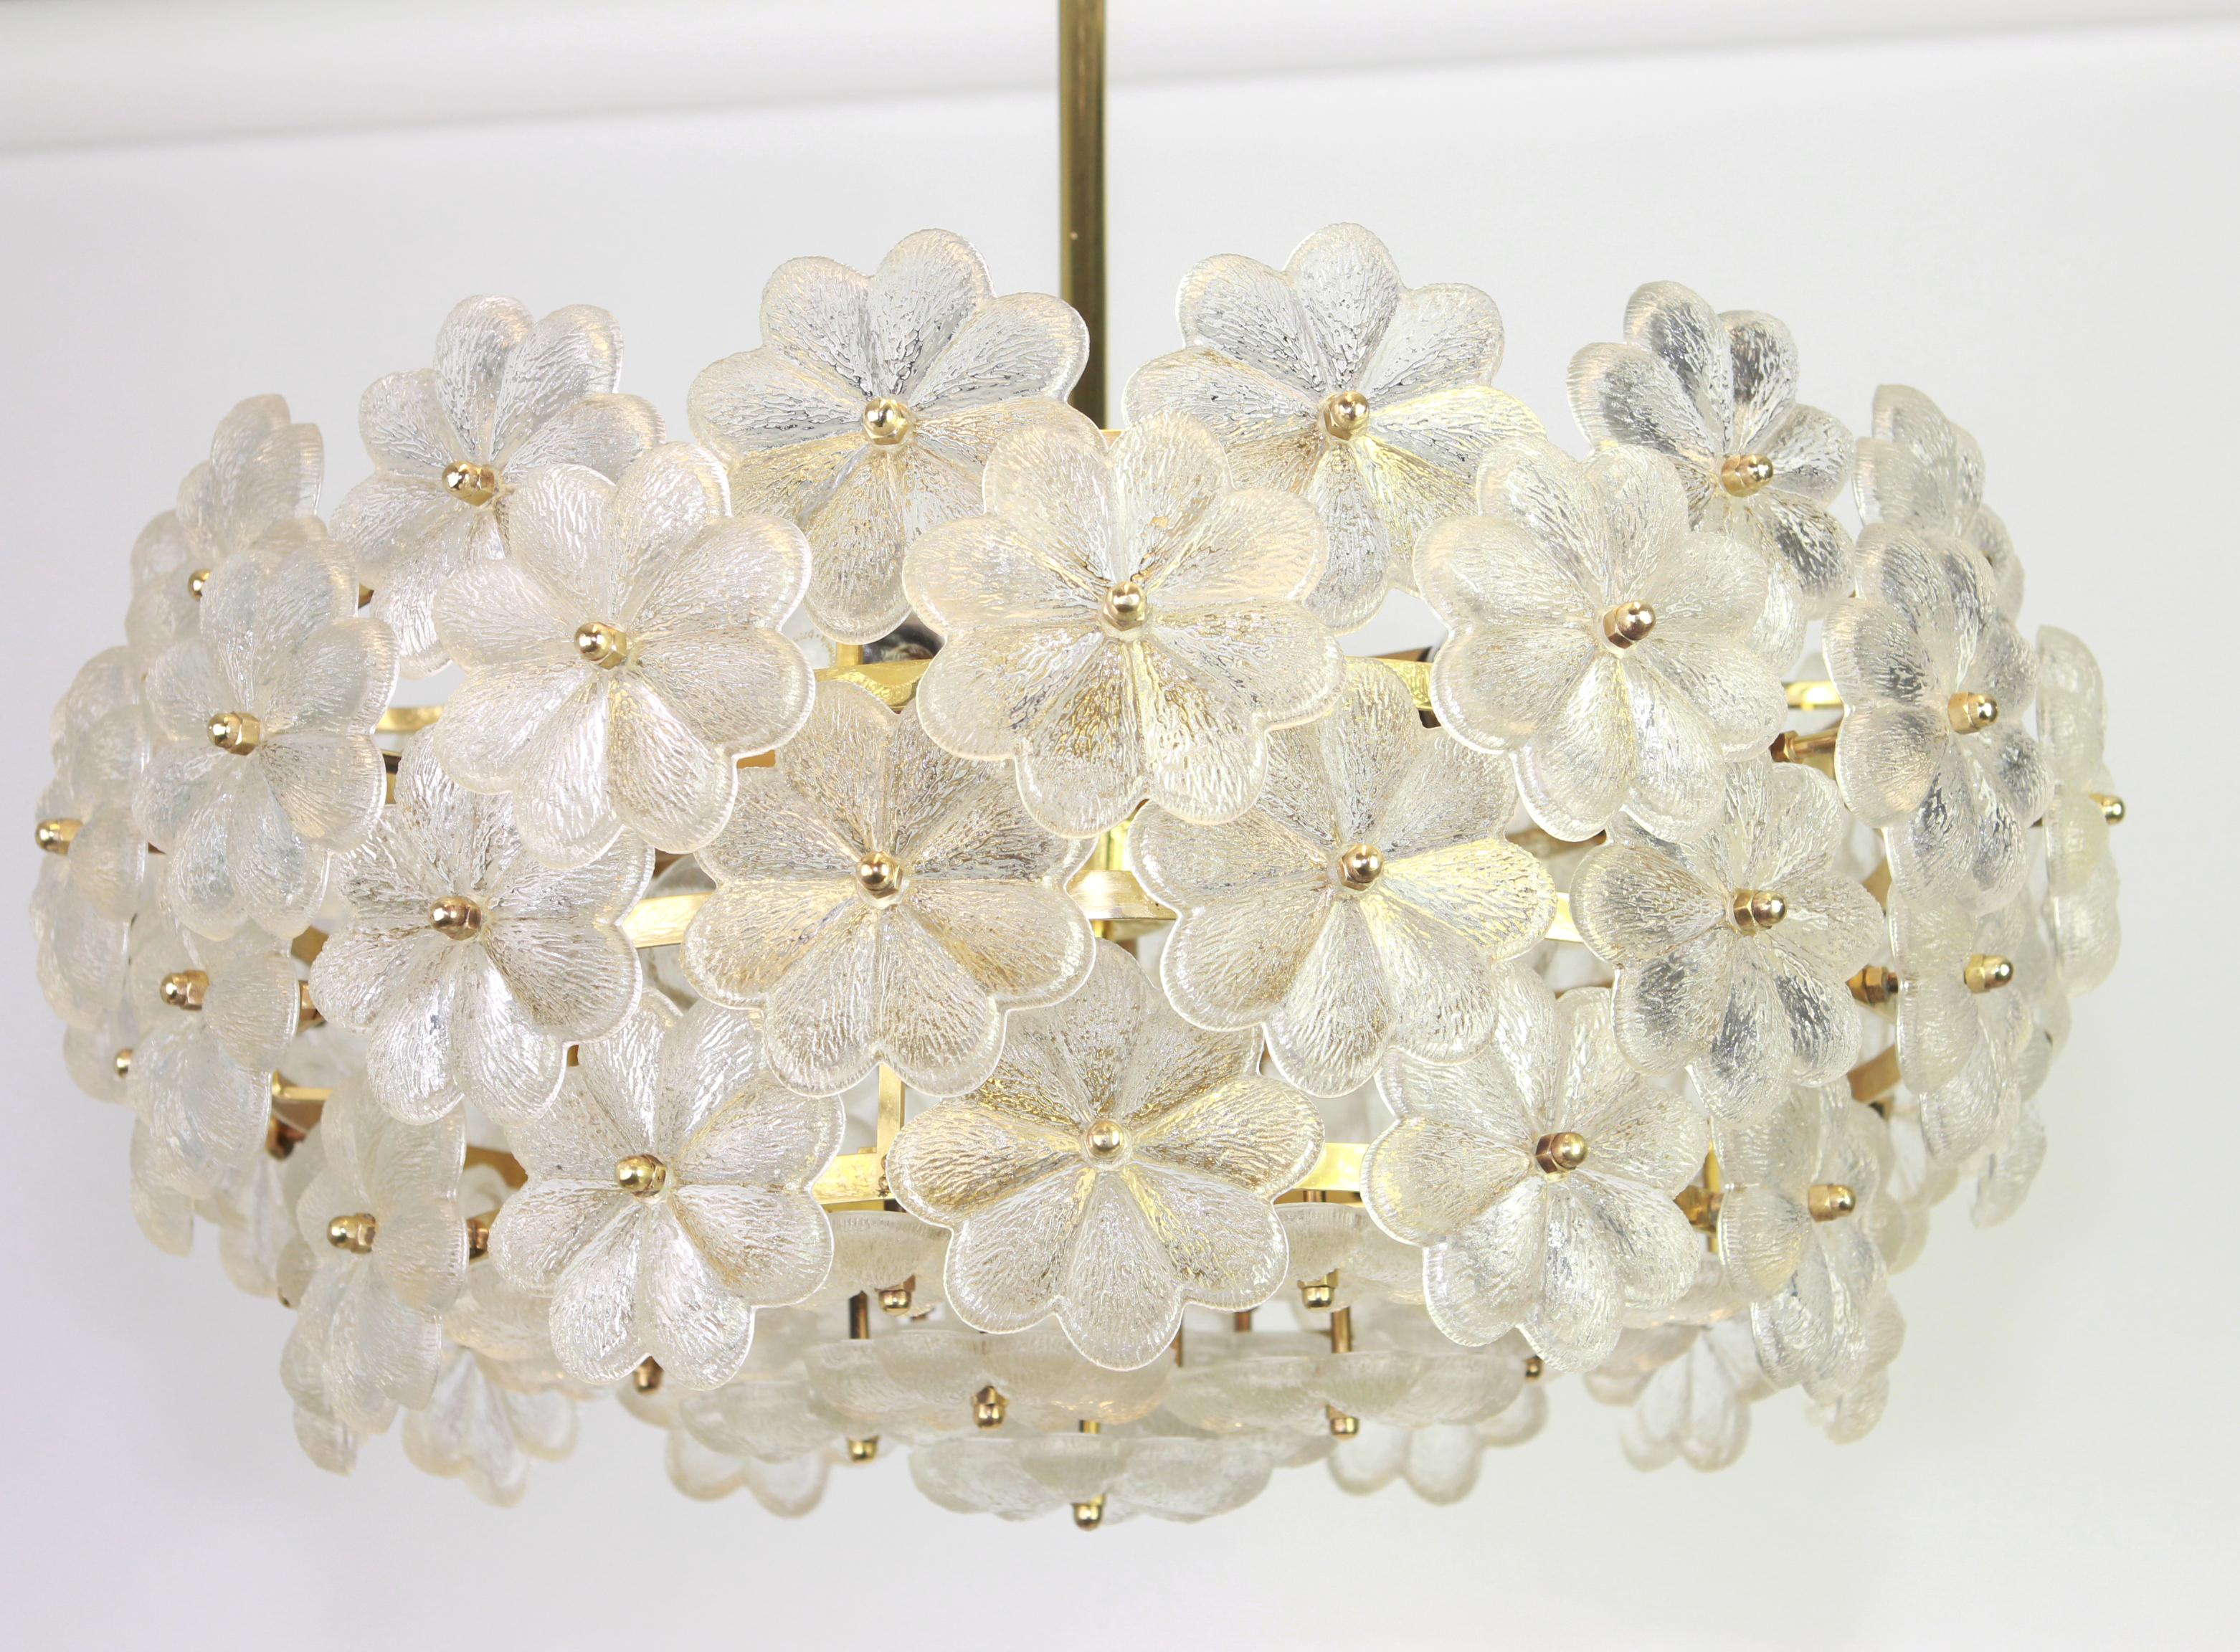 Large stunning chandelier with many Murano flower crystal glass over a brass frame, made by Ernst Palme in Germany, 1970s.
High quality and in very good condition. Cleaned, well-wired and ready to use. 

The chandelier requires 8 x E14 small